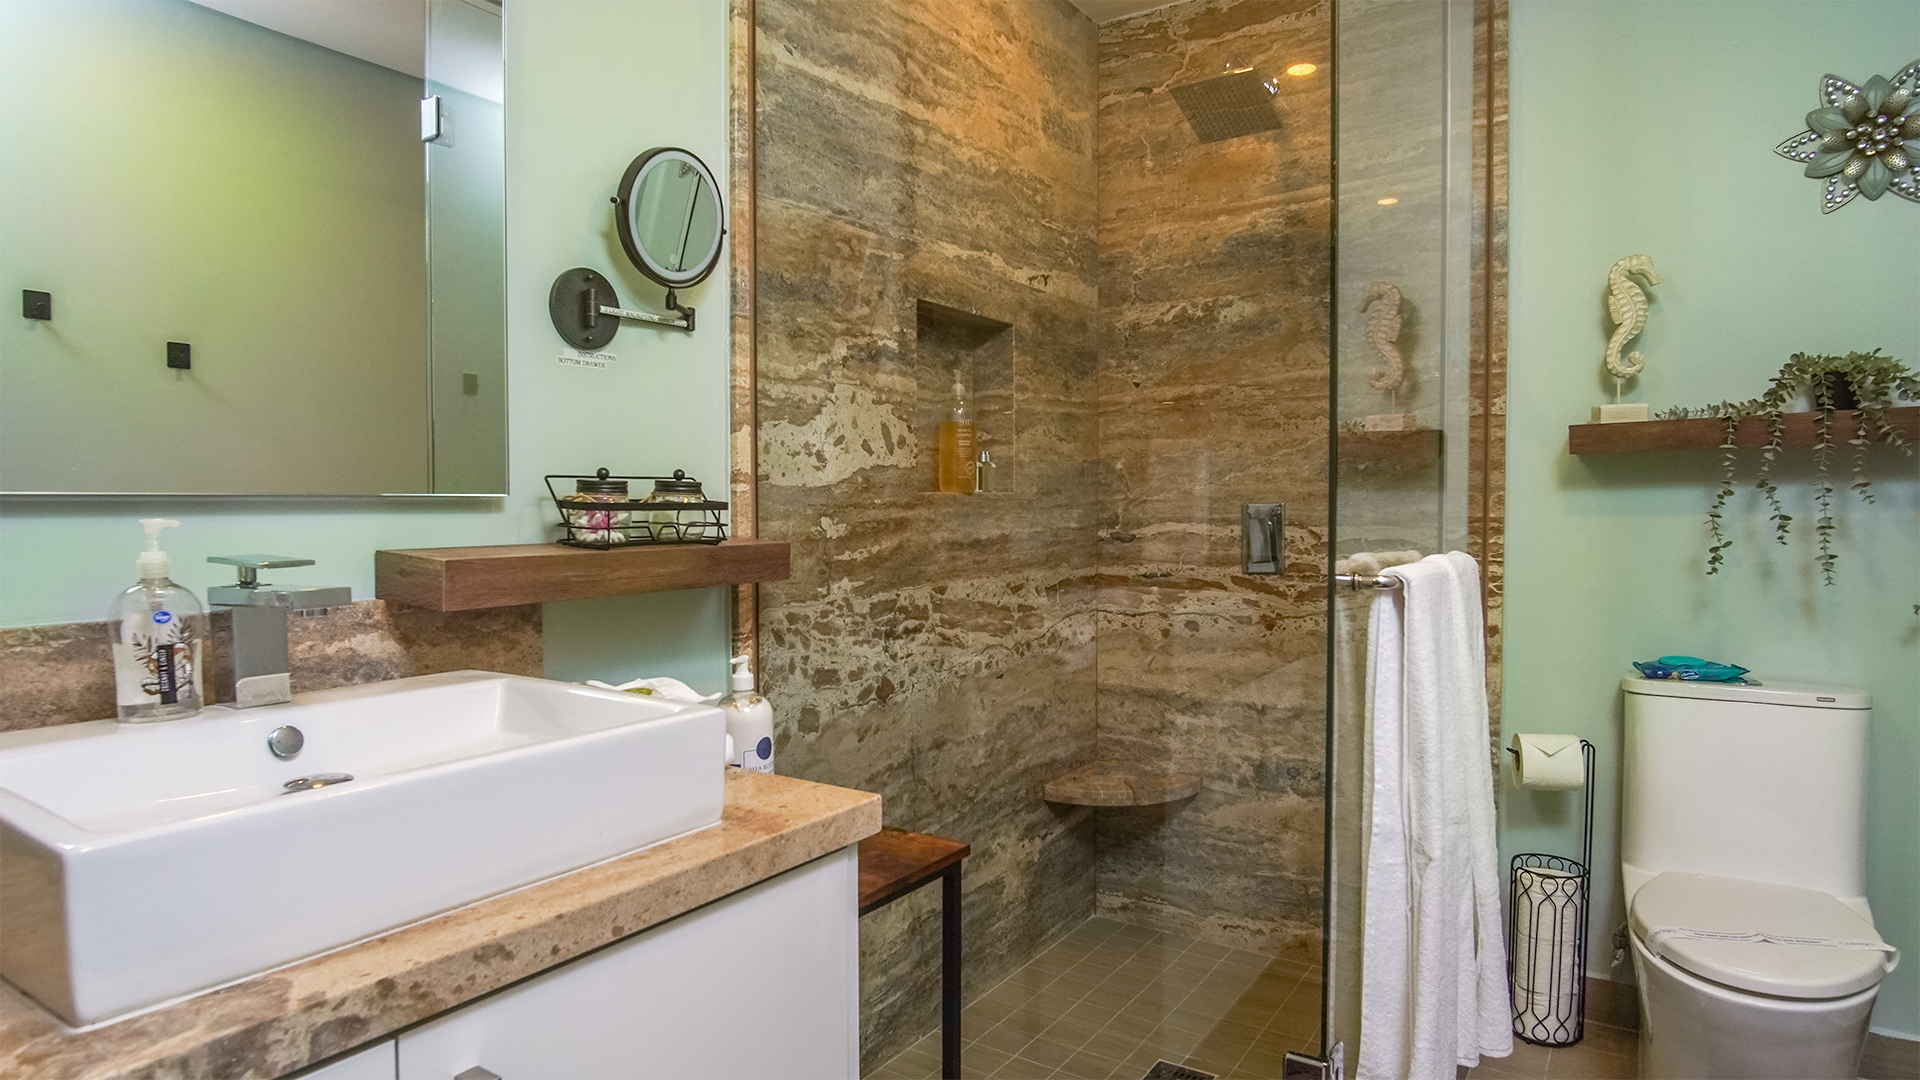 The marbled shower and vanity of the second bathroom, connected directly to the second bedroom.